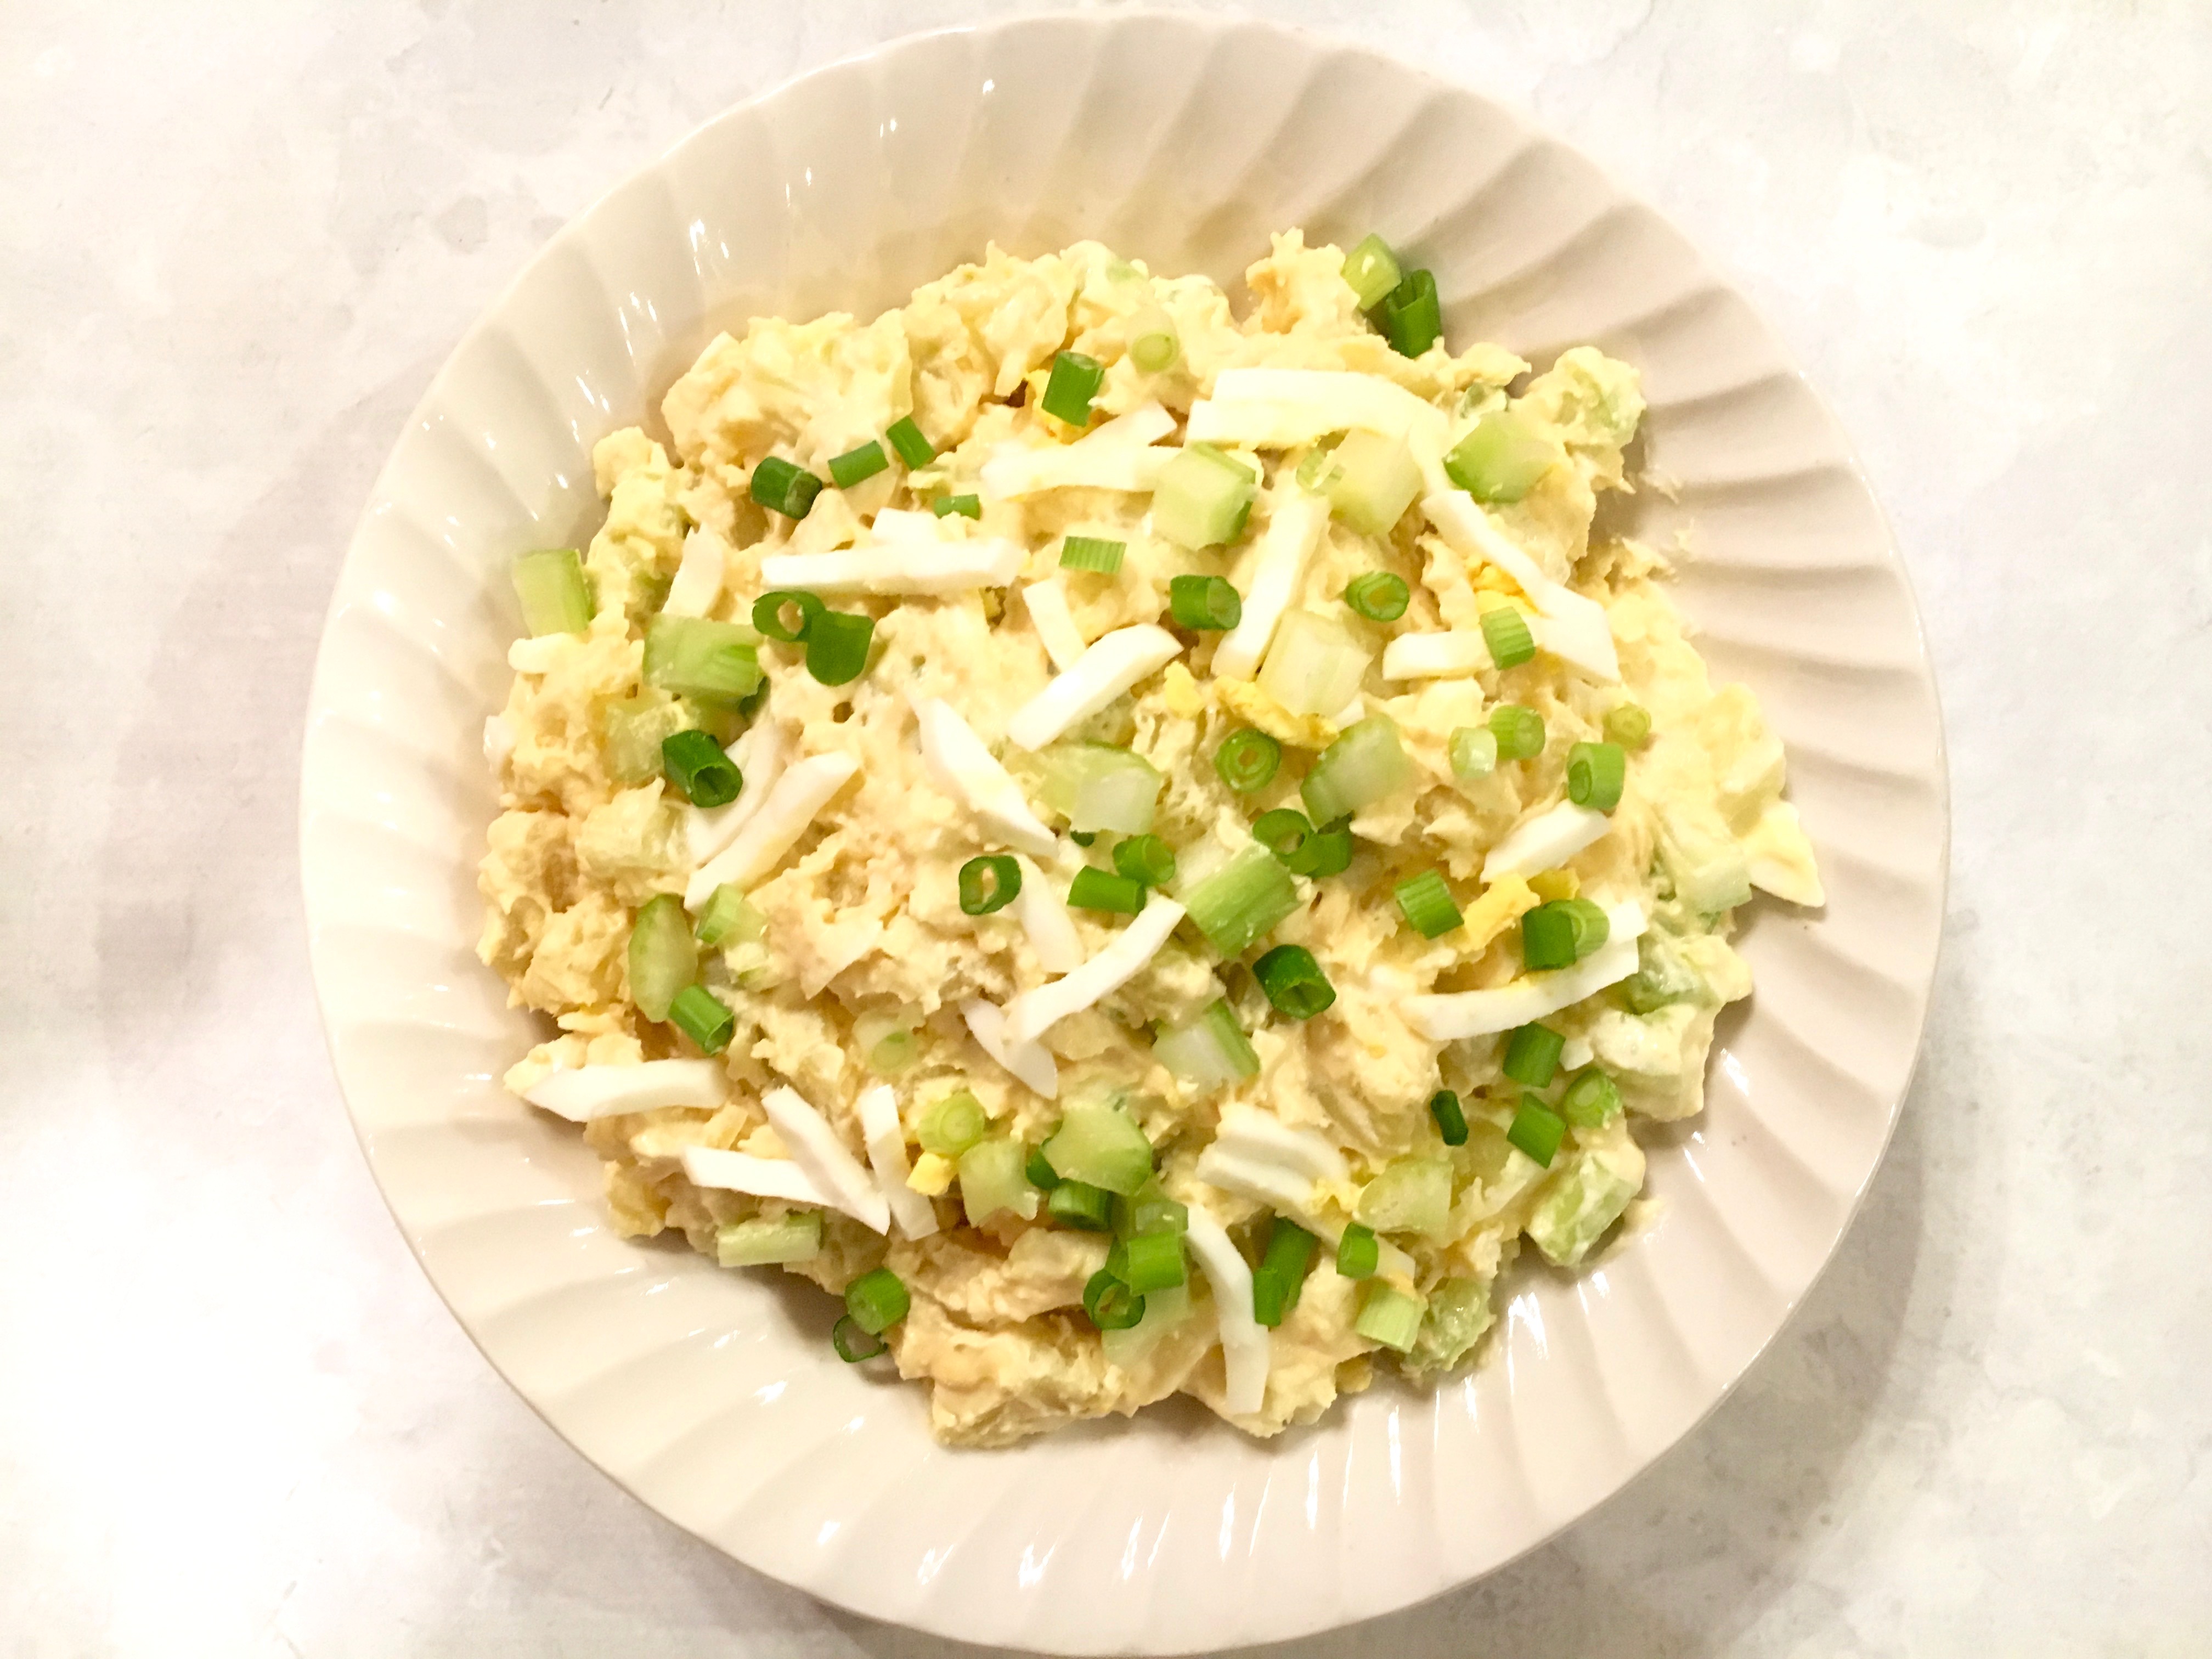 This Easy No Mayo Potato Salad Recipe is will become a favorite at your next picnic, BBQ or potluck. This potato salad is elevated by the spicy addition of Dijon mustard. Sour cream replaces the mayonnaise and the addition of egg, celery, green onions and dill pickle make this a zesty potato salad worthy of your next gathering.